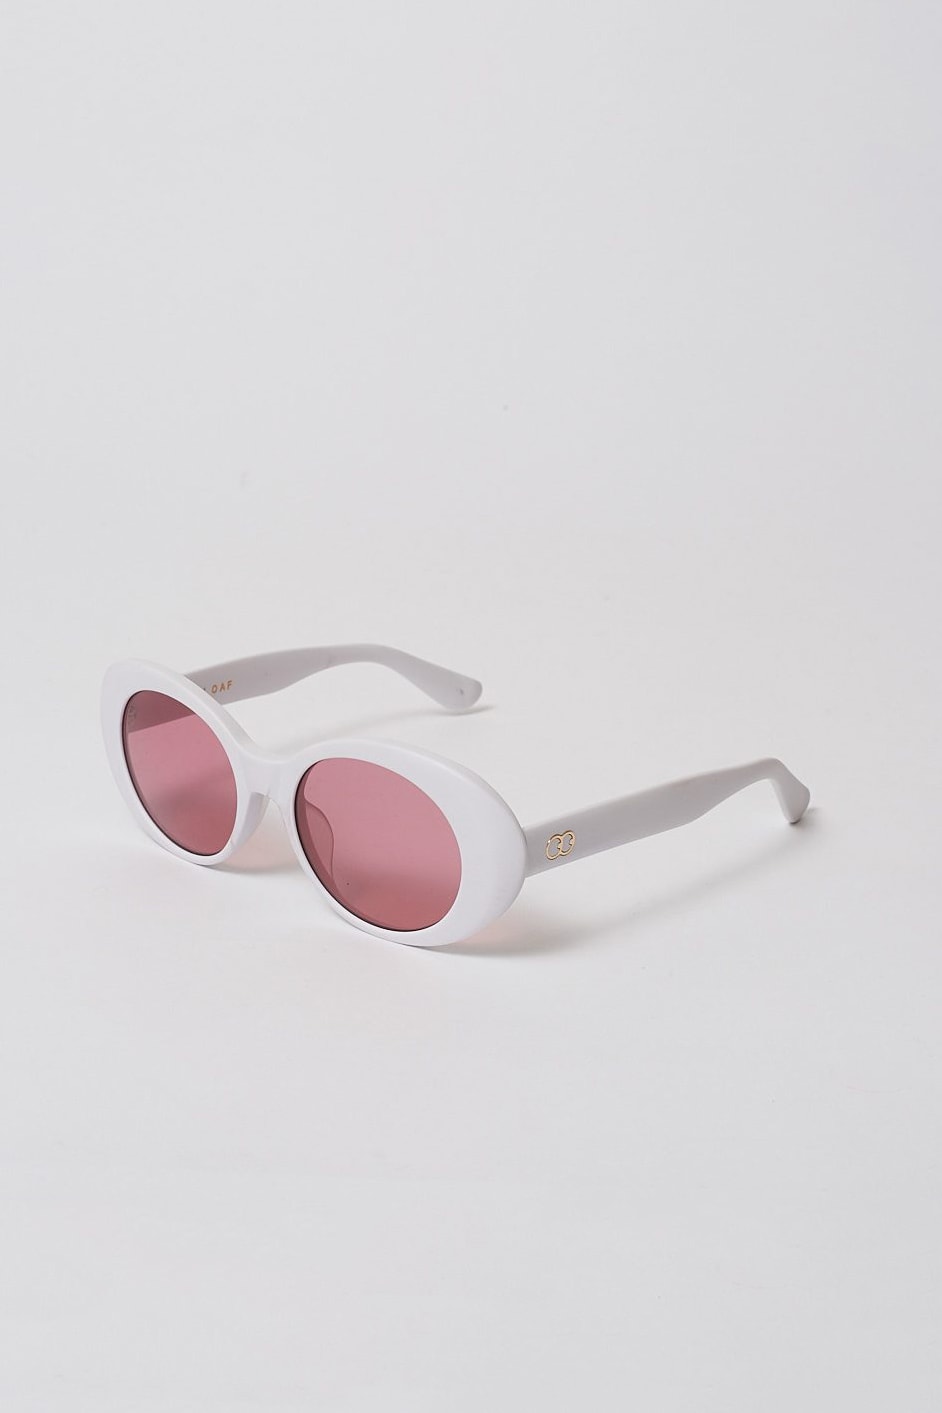 lazy oaf debut sunglasses collection london white oval pink shade